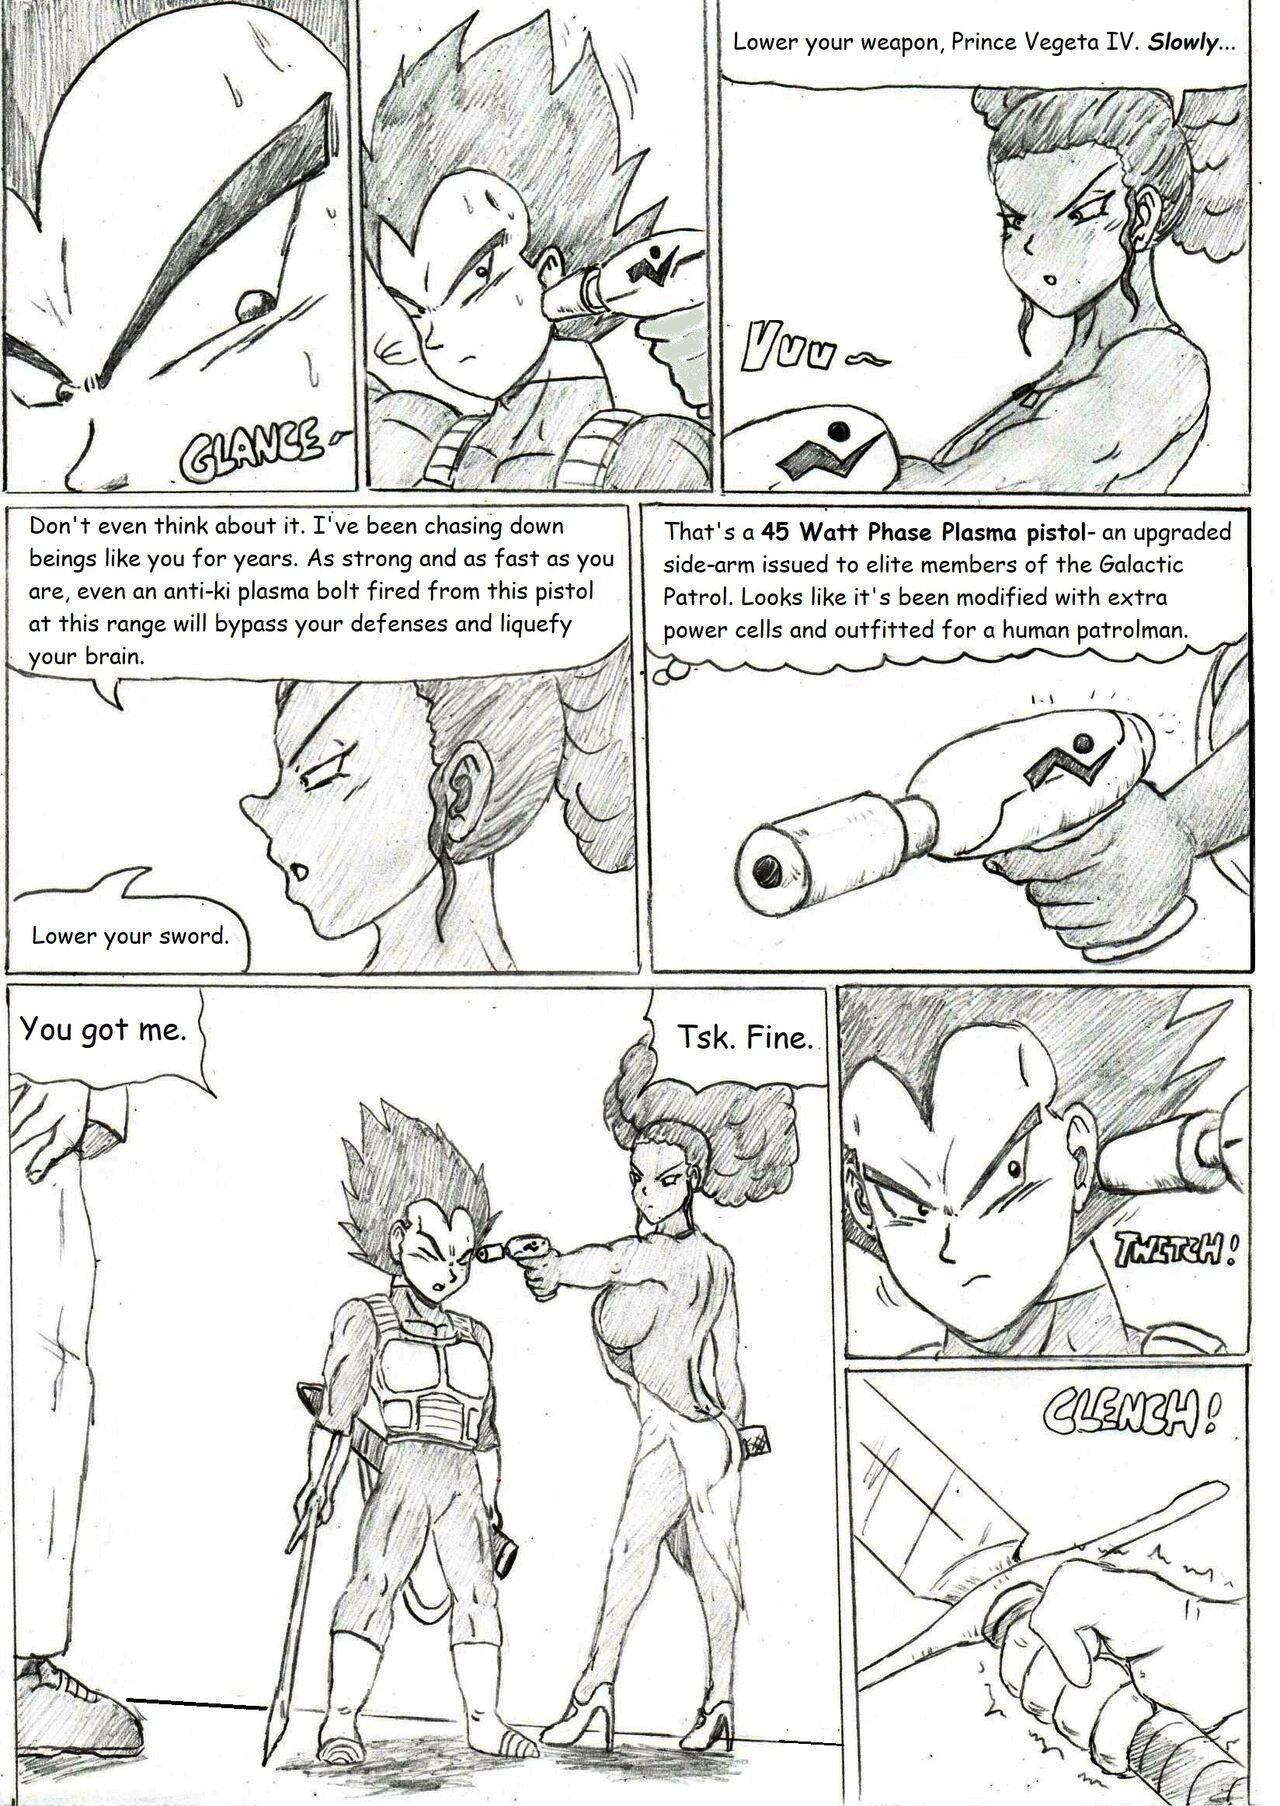 [TheWriteFiction] Dragonball Z Golden Age - Chapter 4 - The Galaxy Soldiers (Ongoing) 17